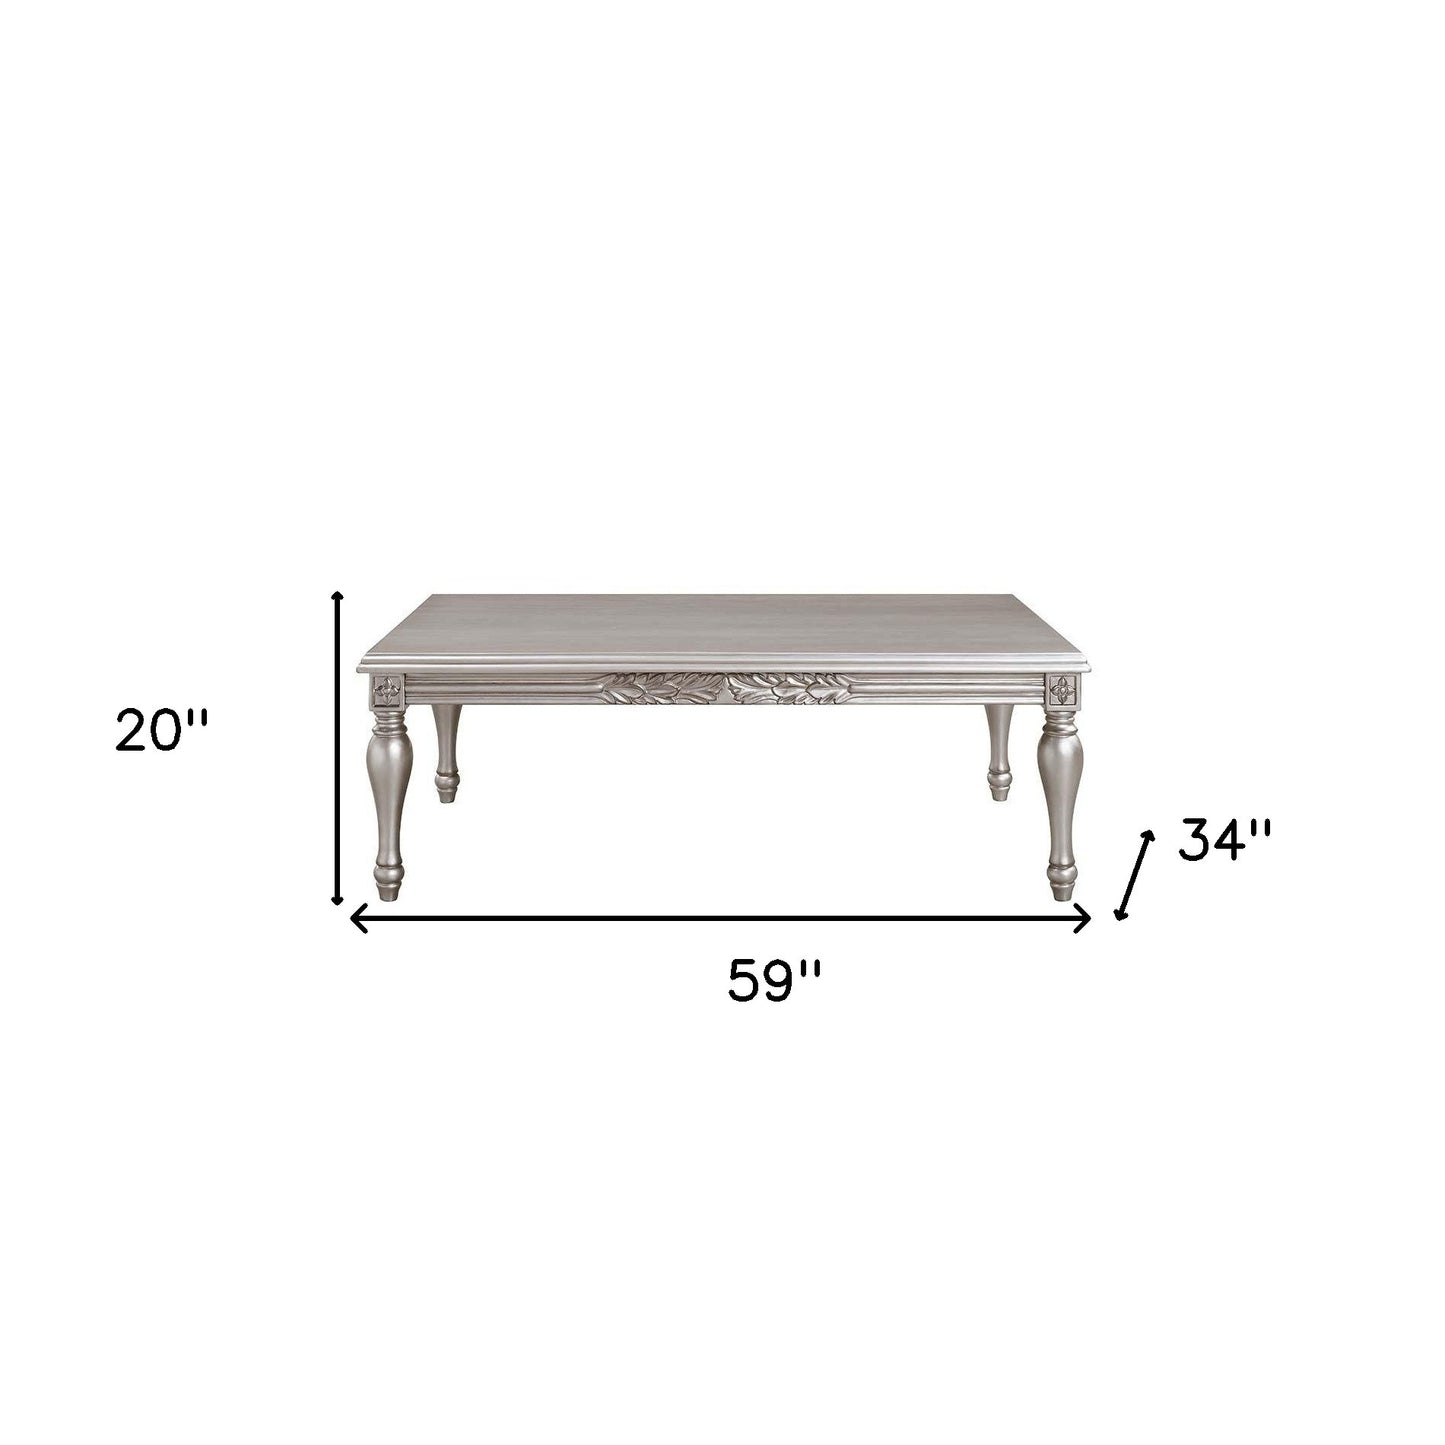 24" Platinum Manufactured Wood Rectangular Coffee Table By Homeroots